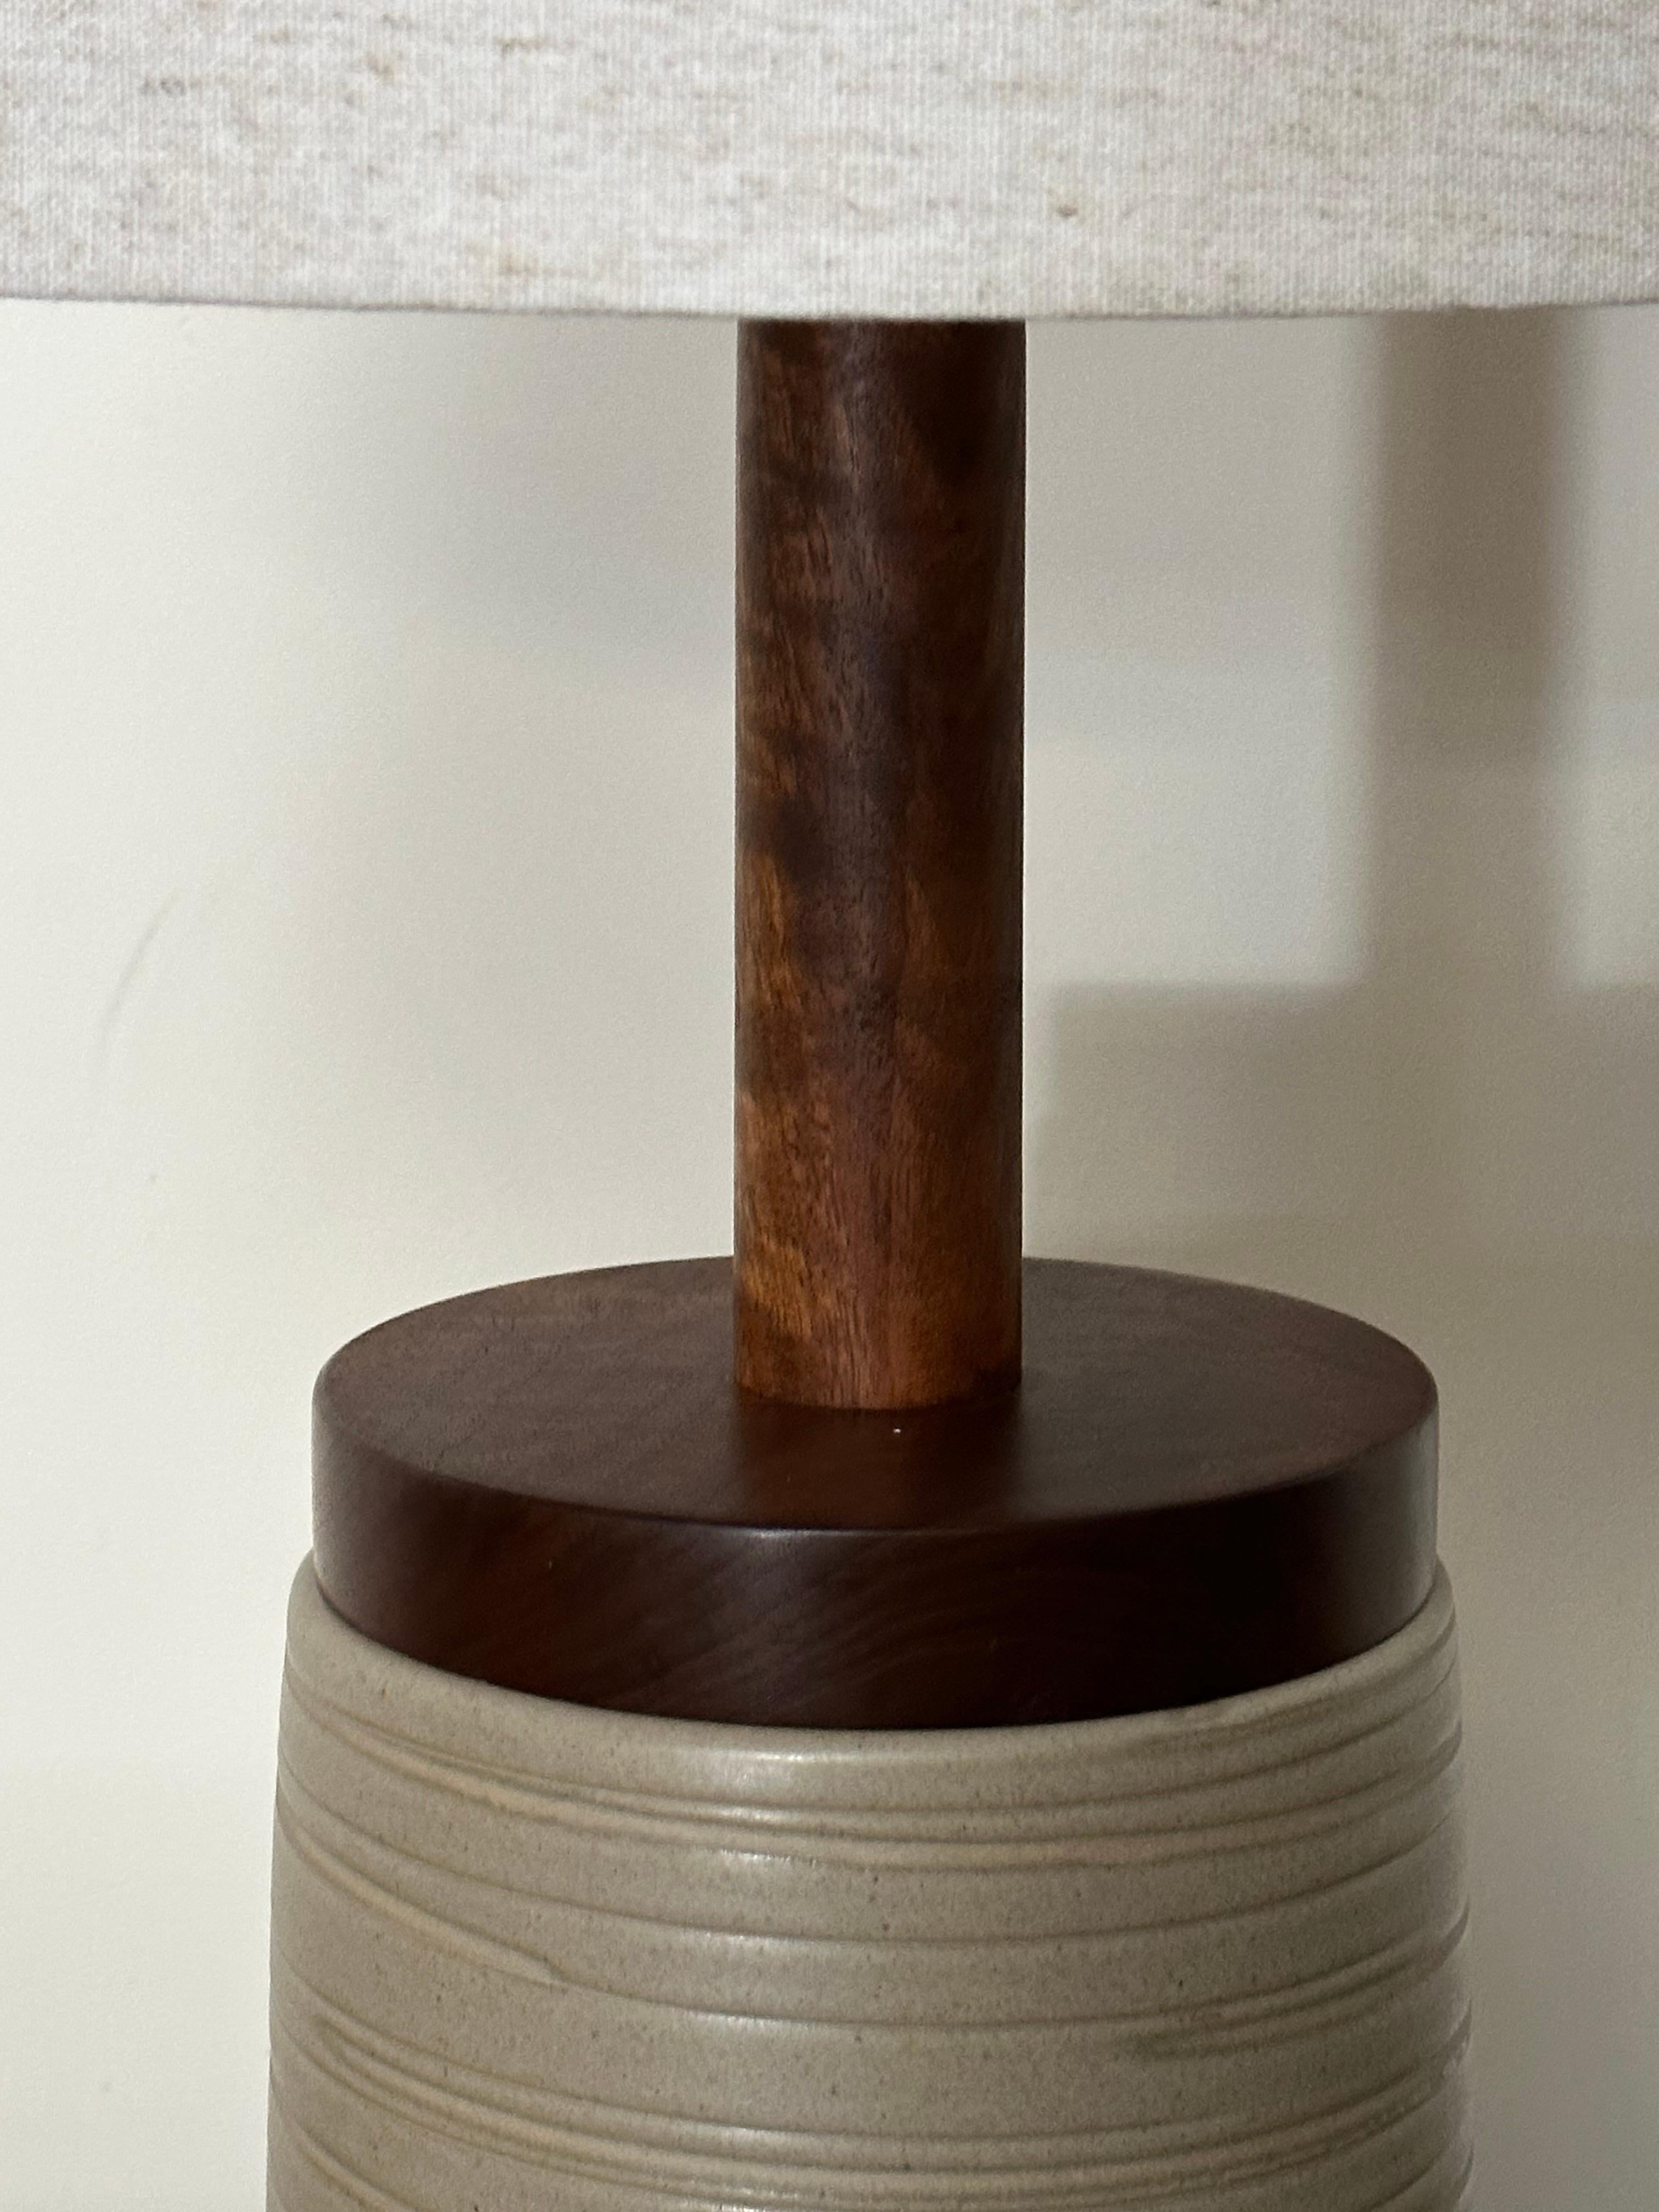 American Jane and Gordon Martz Ceramic and Walnut Table Lamp For Sale